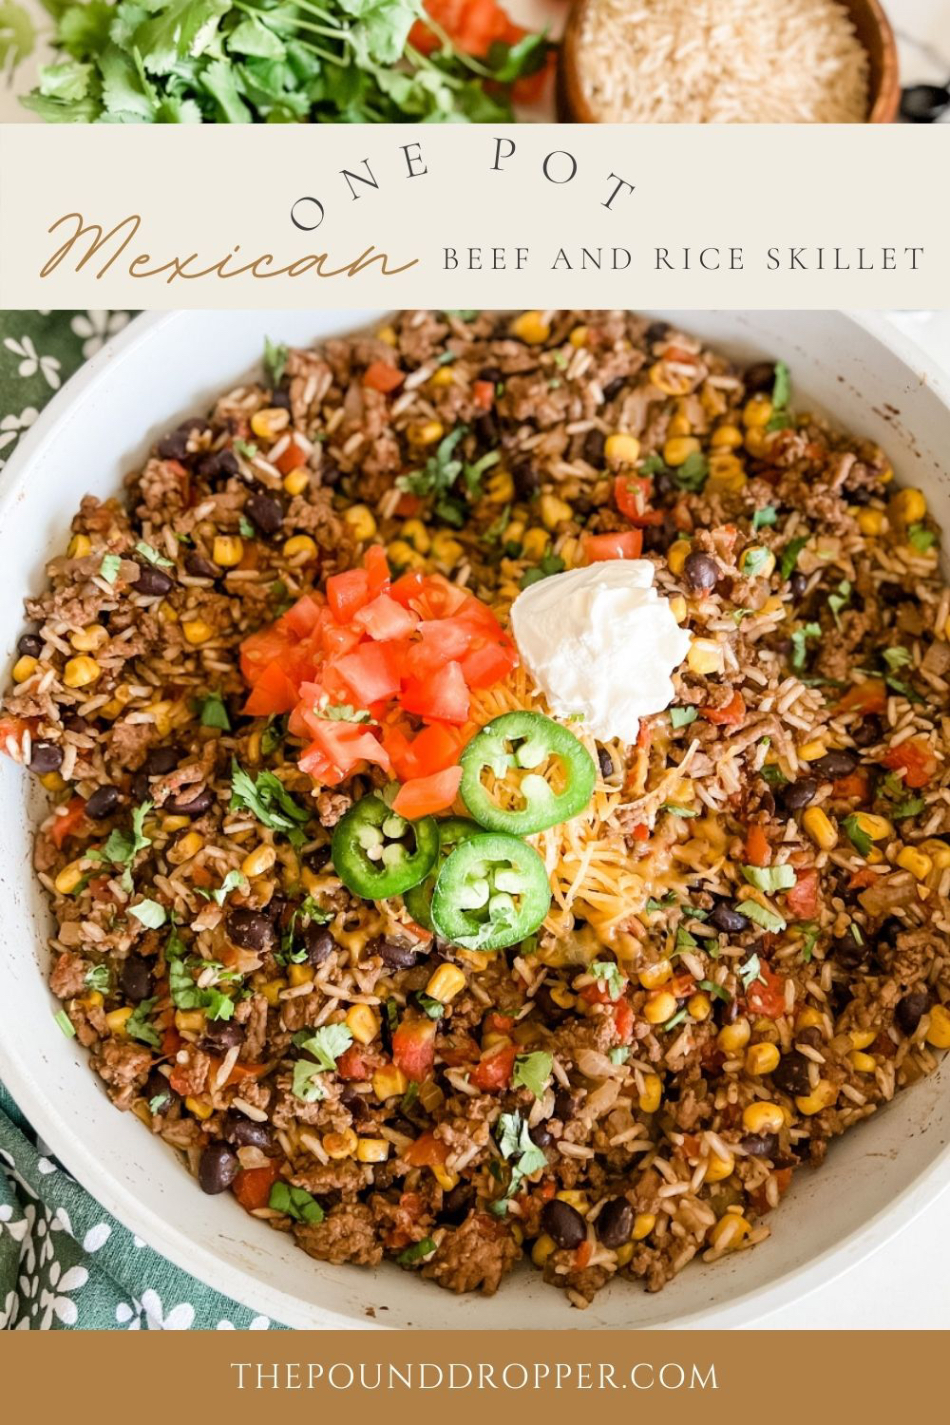 This One Pot Mexican Beef and Rice Skillet is a simple one pot dinner recipe, infused with Mexican flavor. This is a dish that the whole family will love-and can be made in just 30 minutes! via @pounddropper